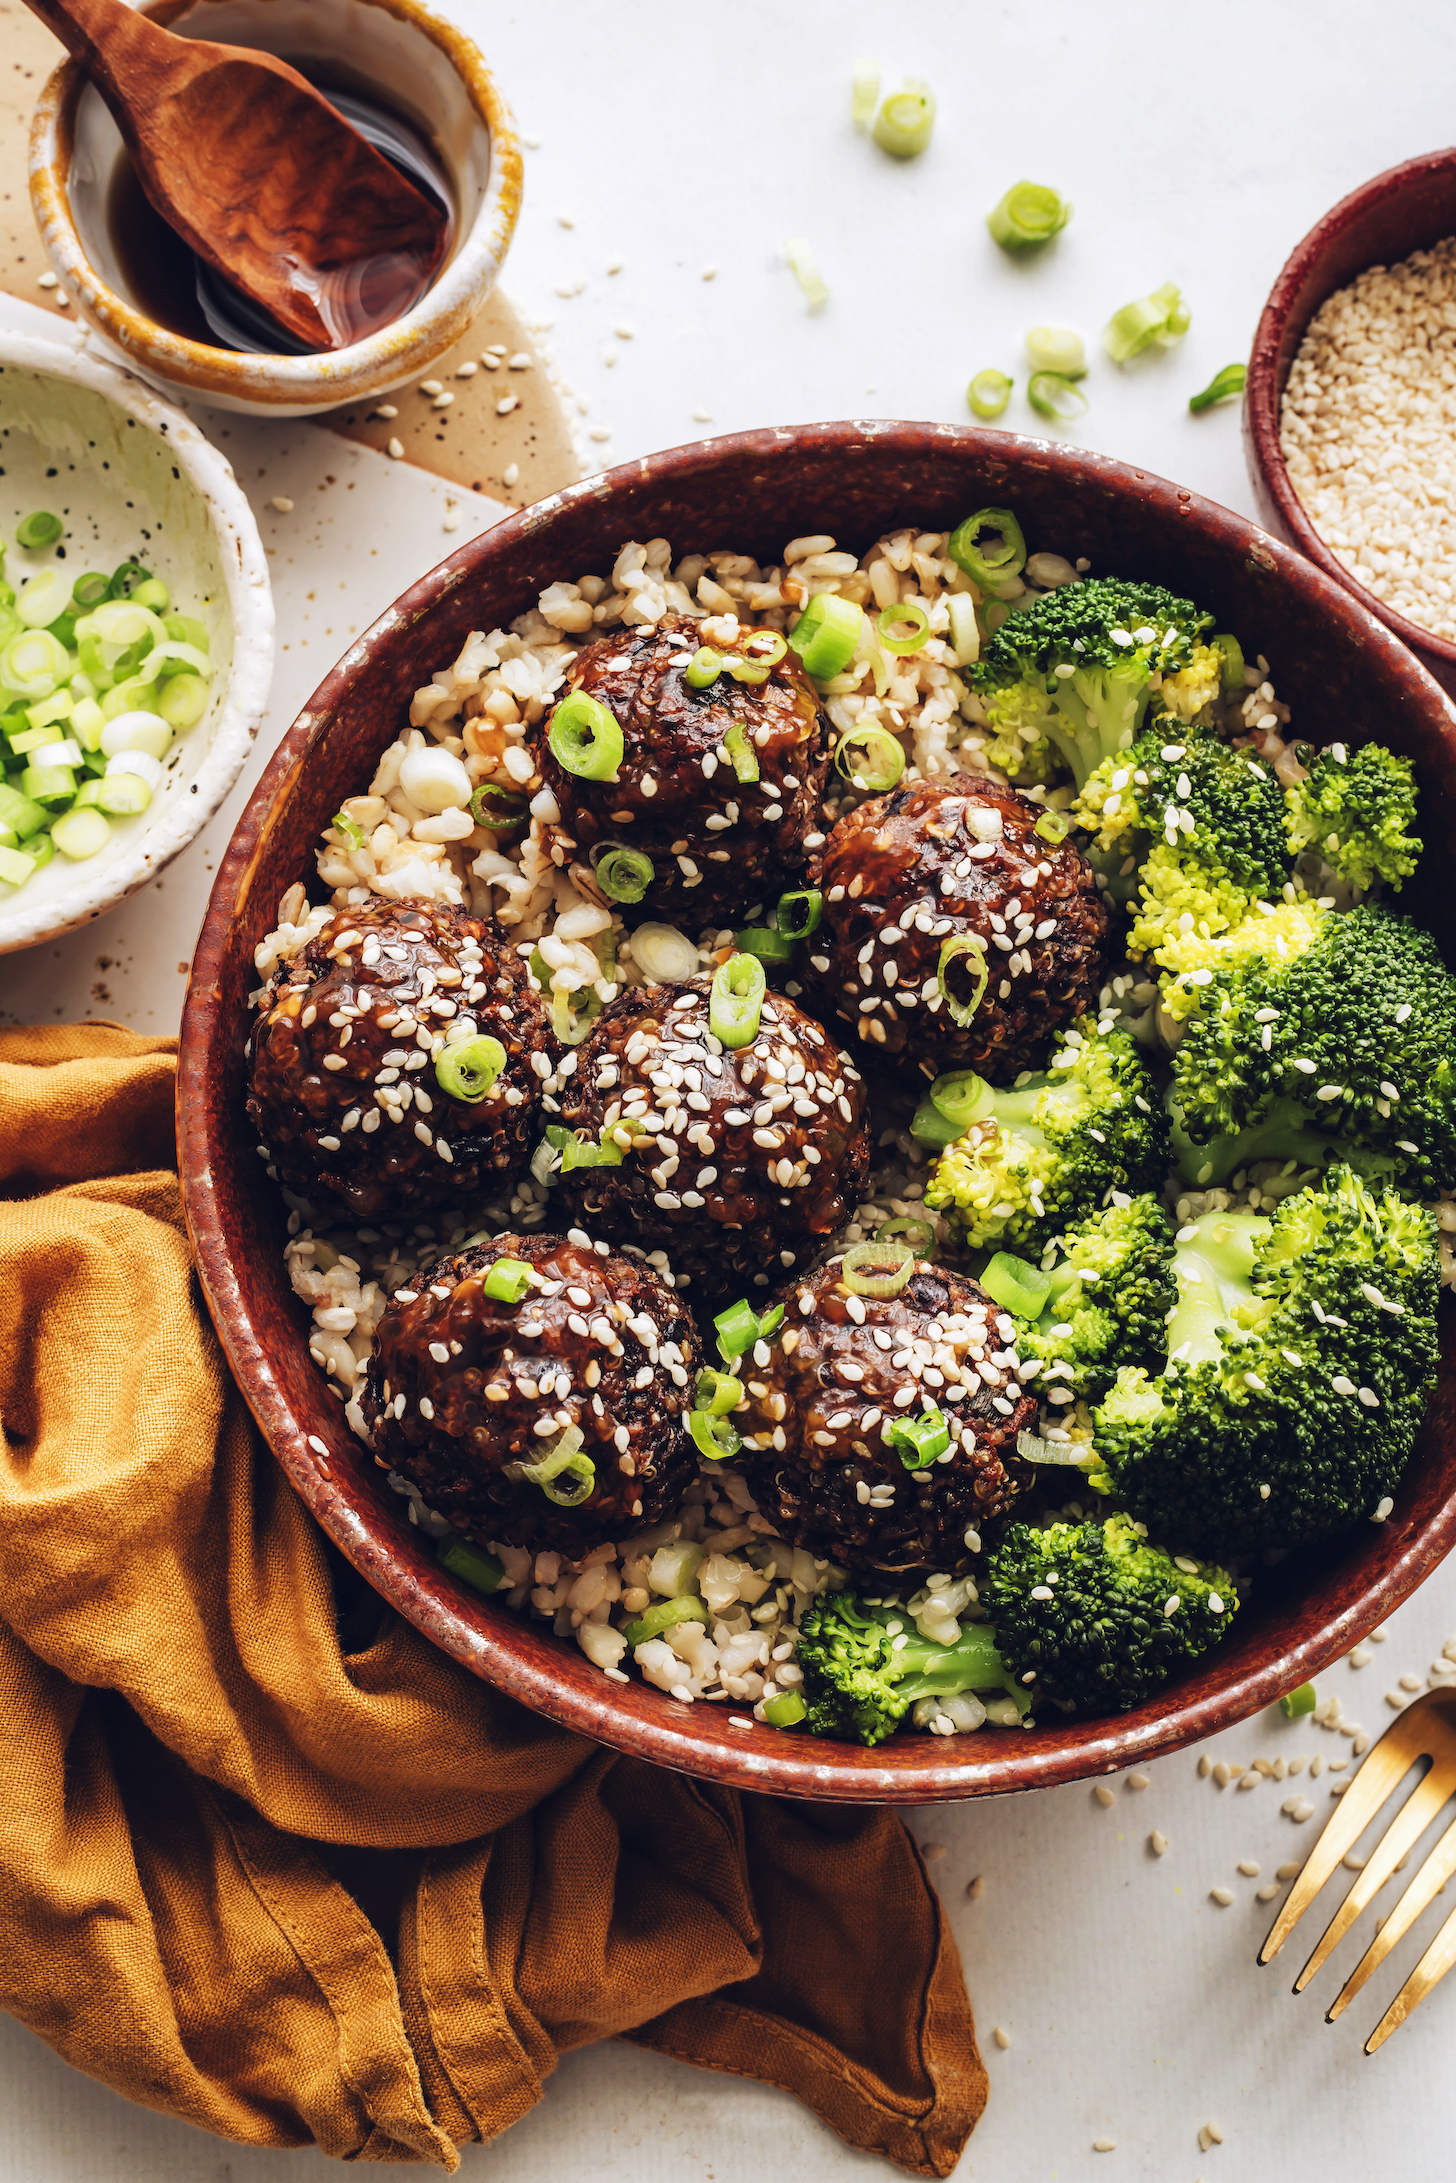 Top down shot of a bowl of sesame ginger vegan meatballs with broccoli over rice